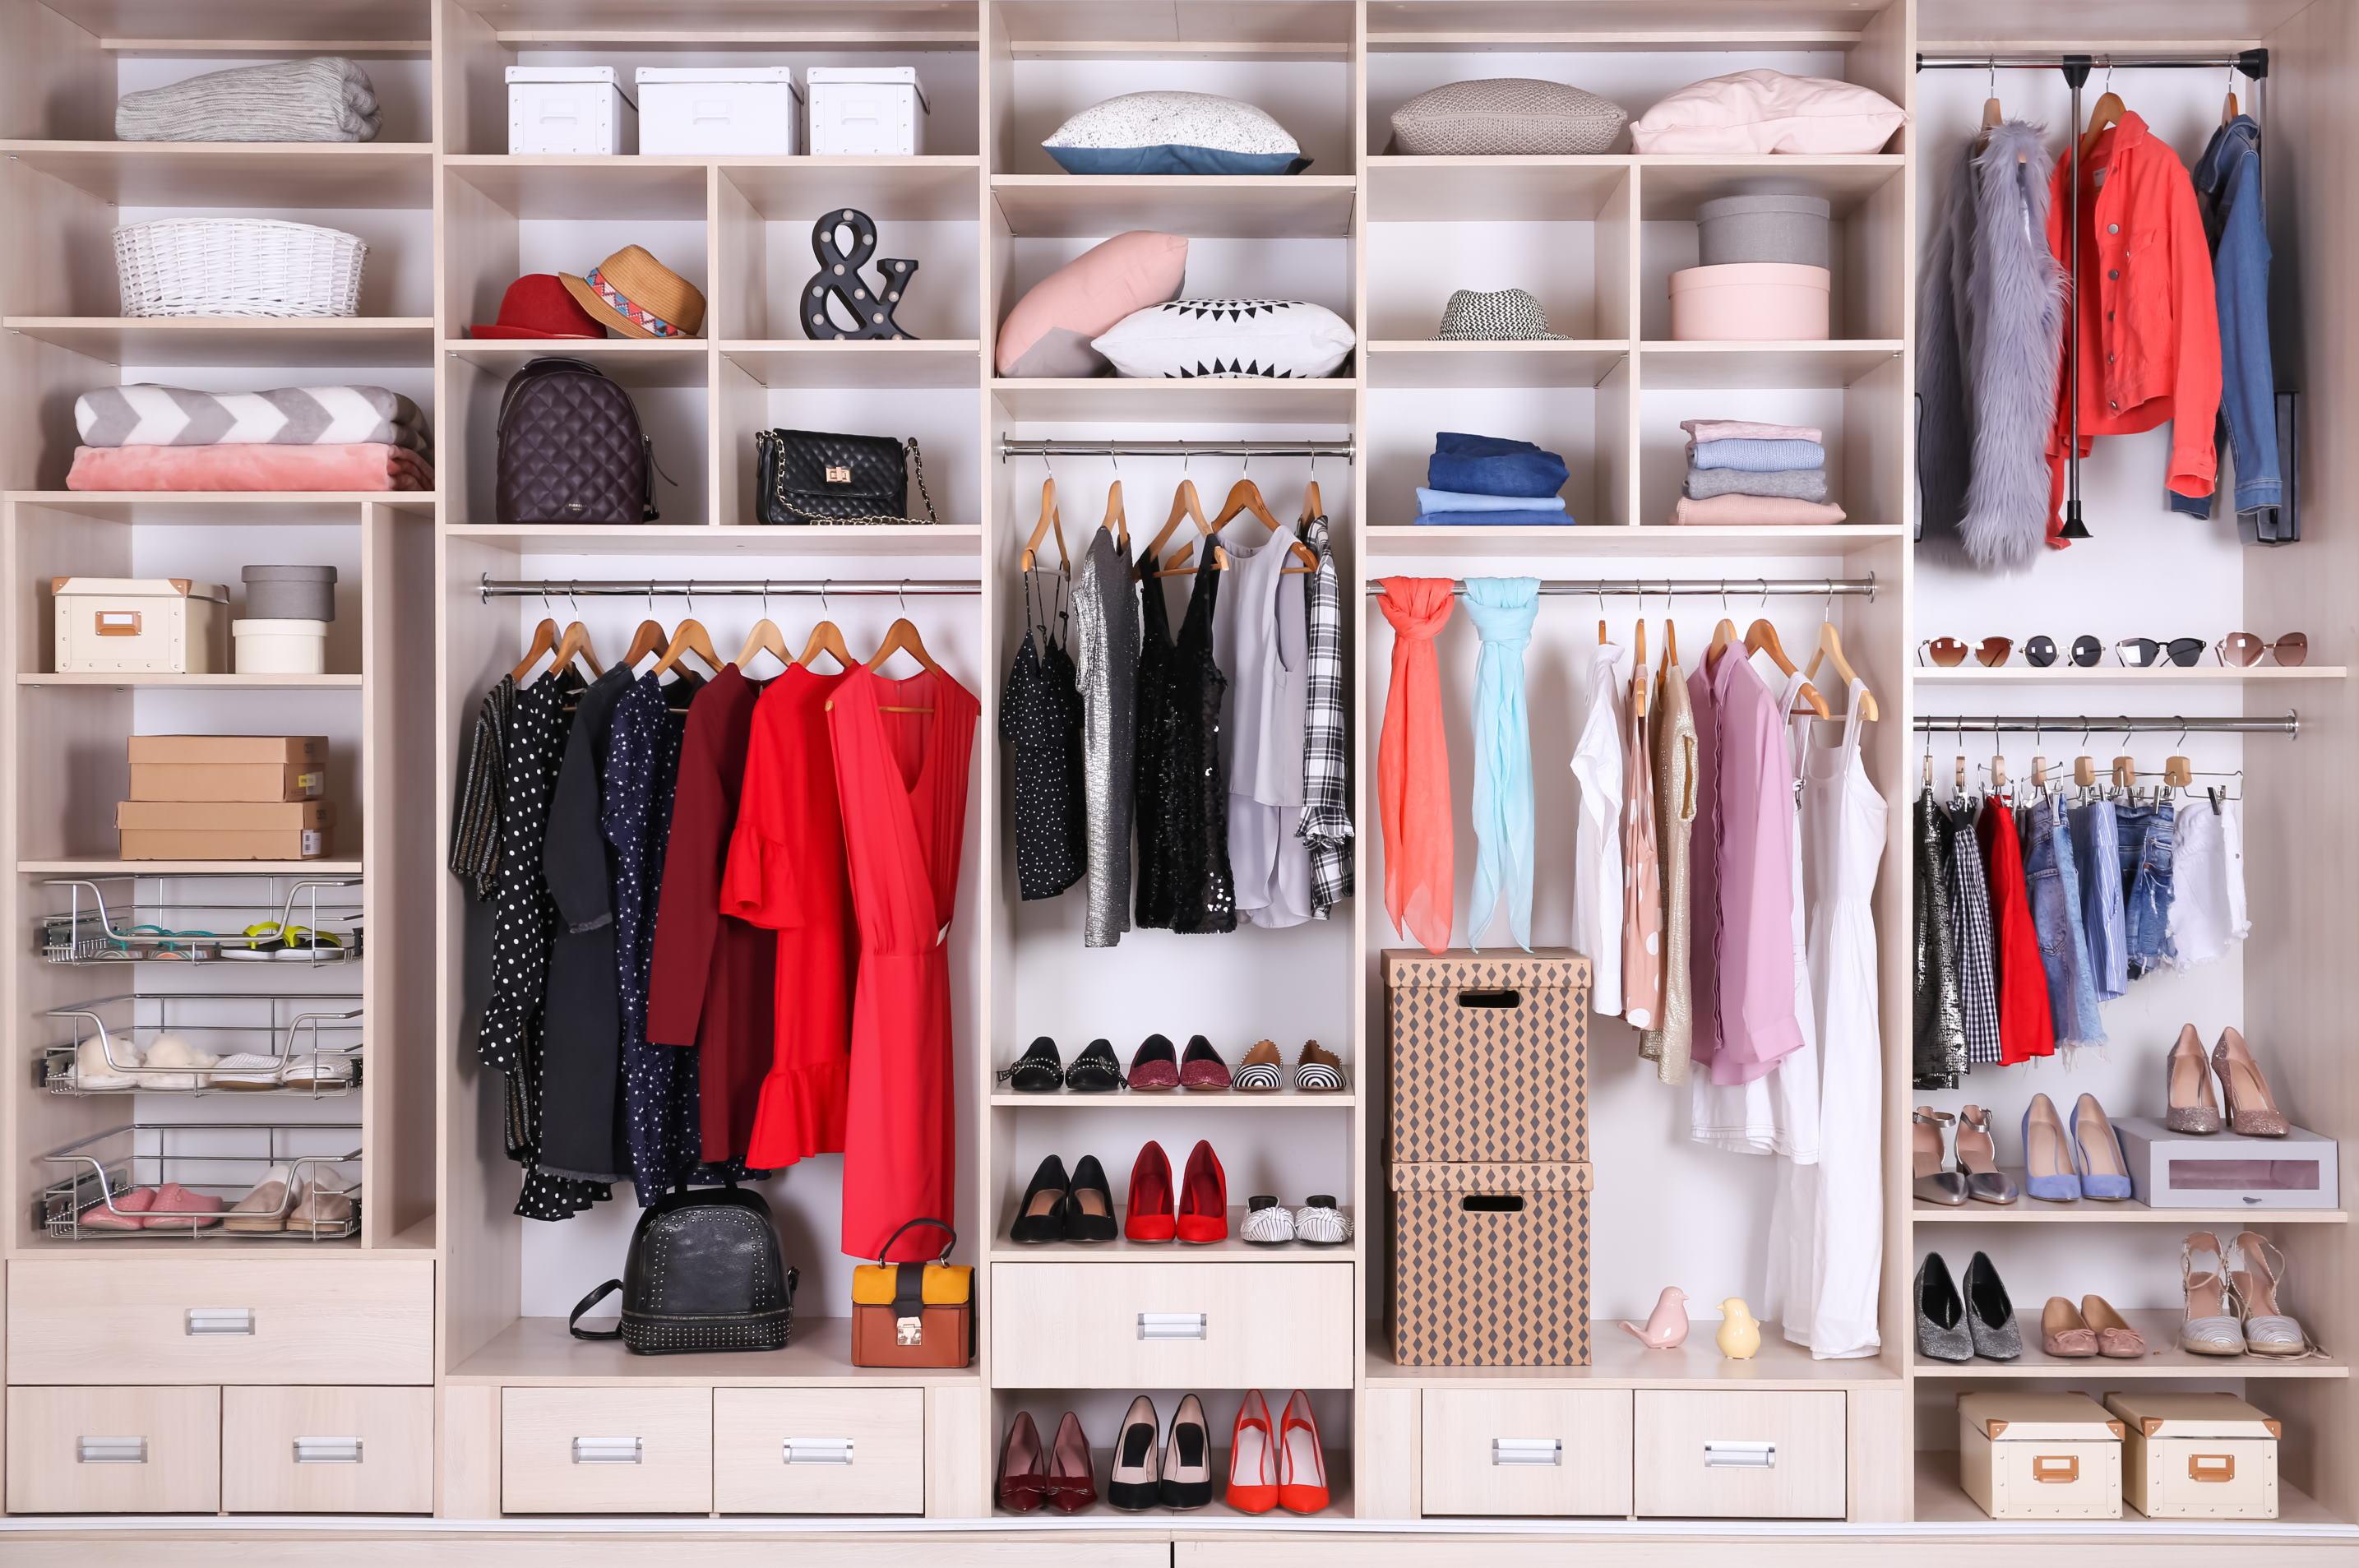 How to build the perfect DIY walk-in wardrobe